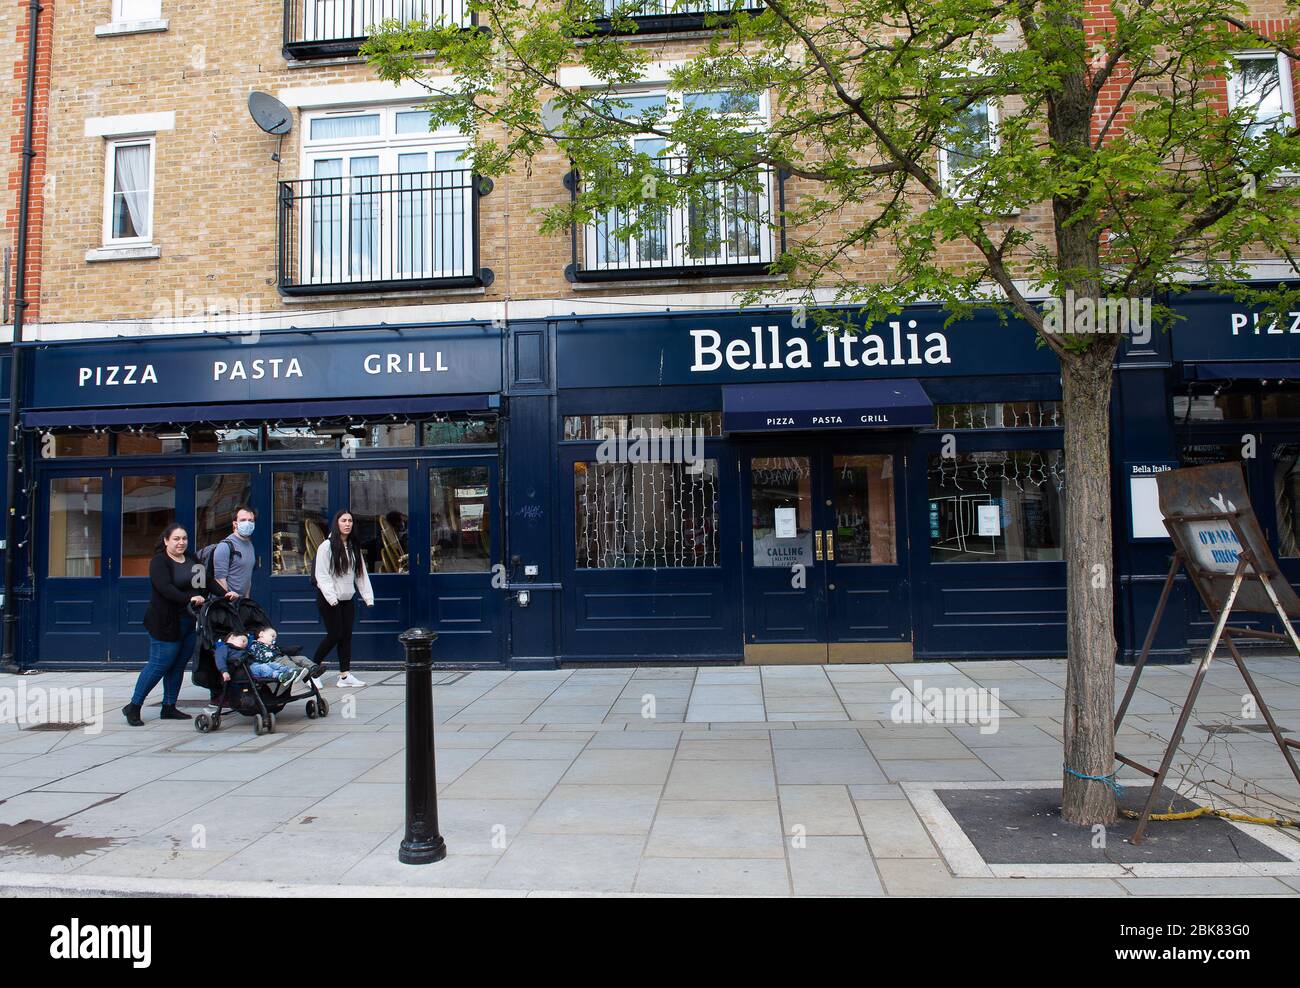 Uxbridge, Middlesex, UK. 2nd May, 2020. The Bella Italia Restaurant remains temporarily closed in Uxbridge as the town remained much quieter than a normal Saturday as shoppers were mainly just out for essential food shopping this Saturday during the Coronavirus Covid-19 Pandemic lockdown. Credit: Maureen McLean/Alamy Stock Photo